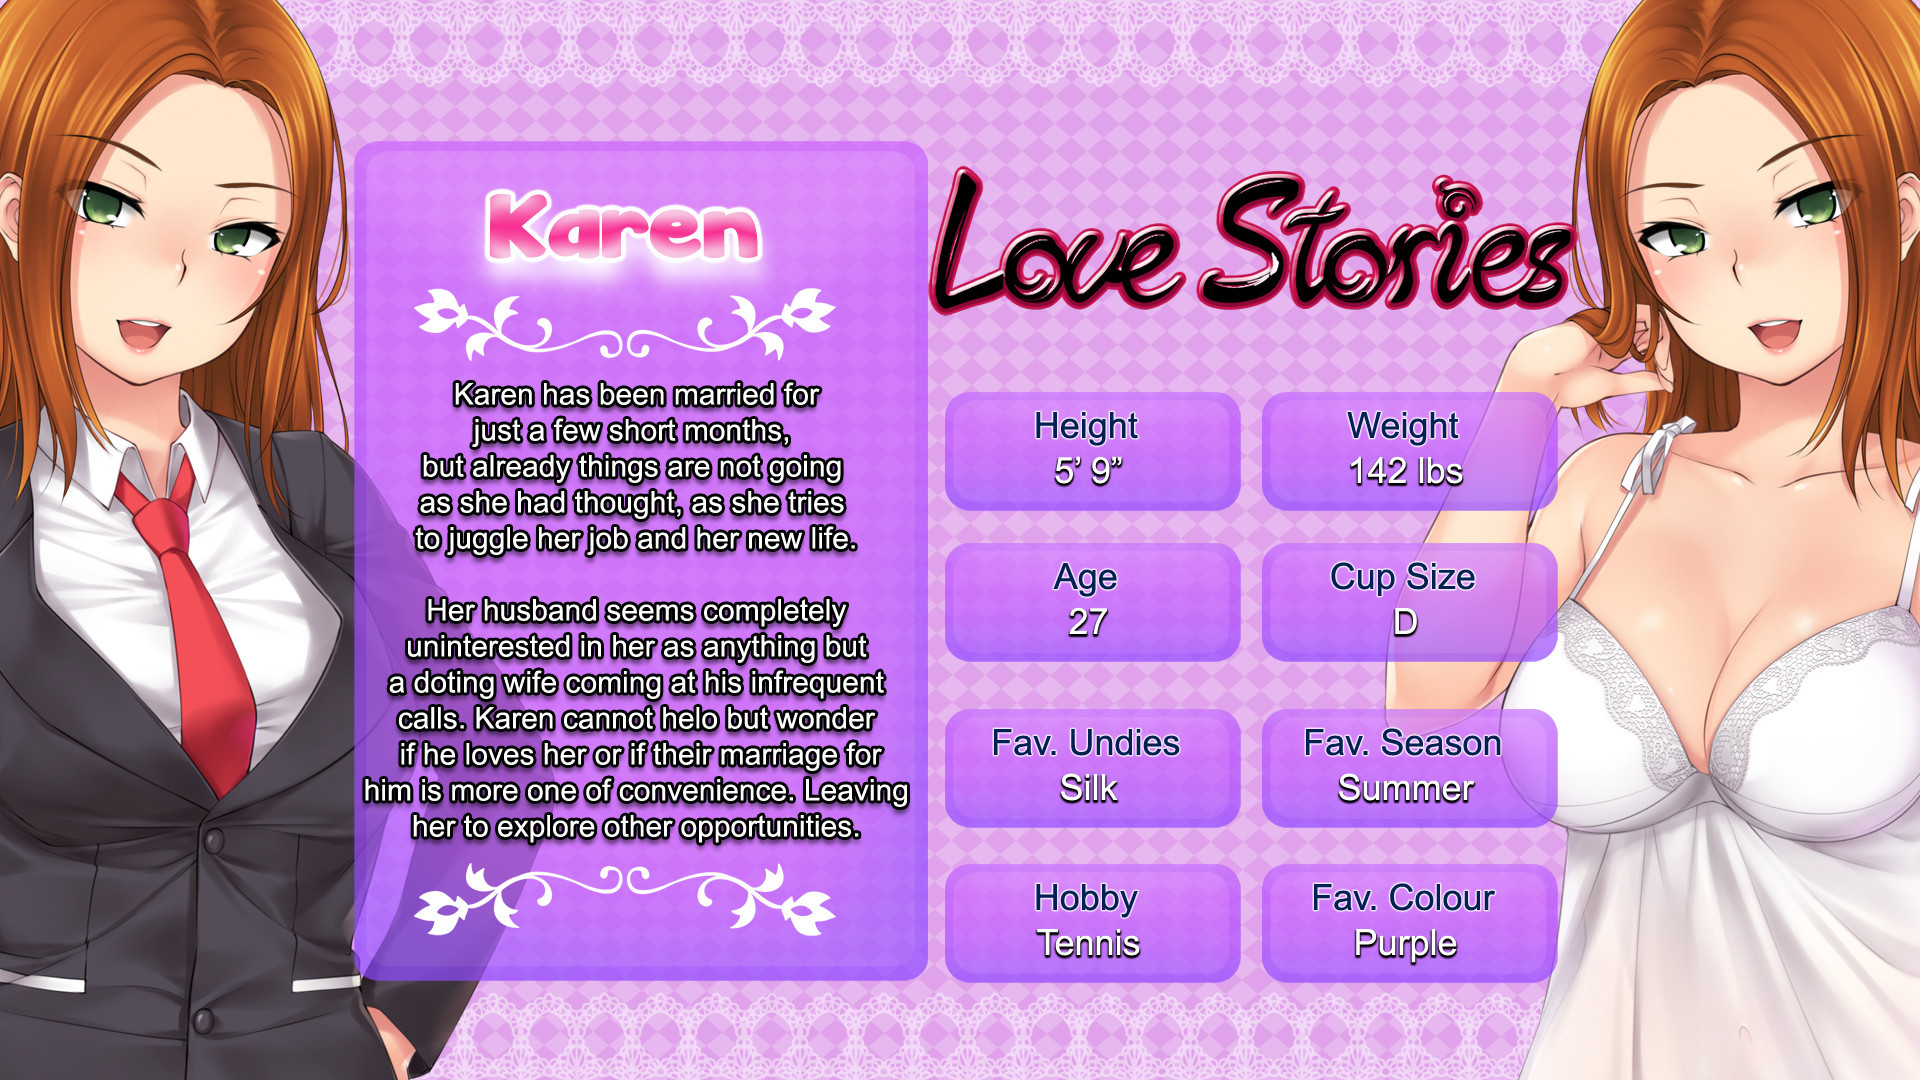 Negligee: Love Stories (c) - Wallpapers Featured Screenshot #1